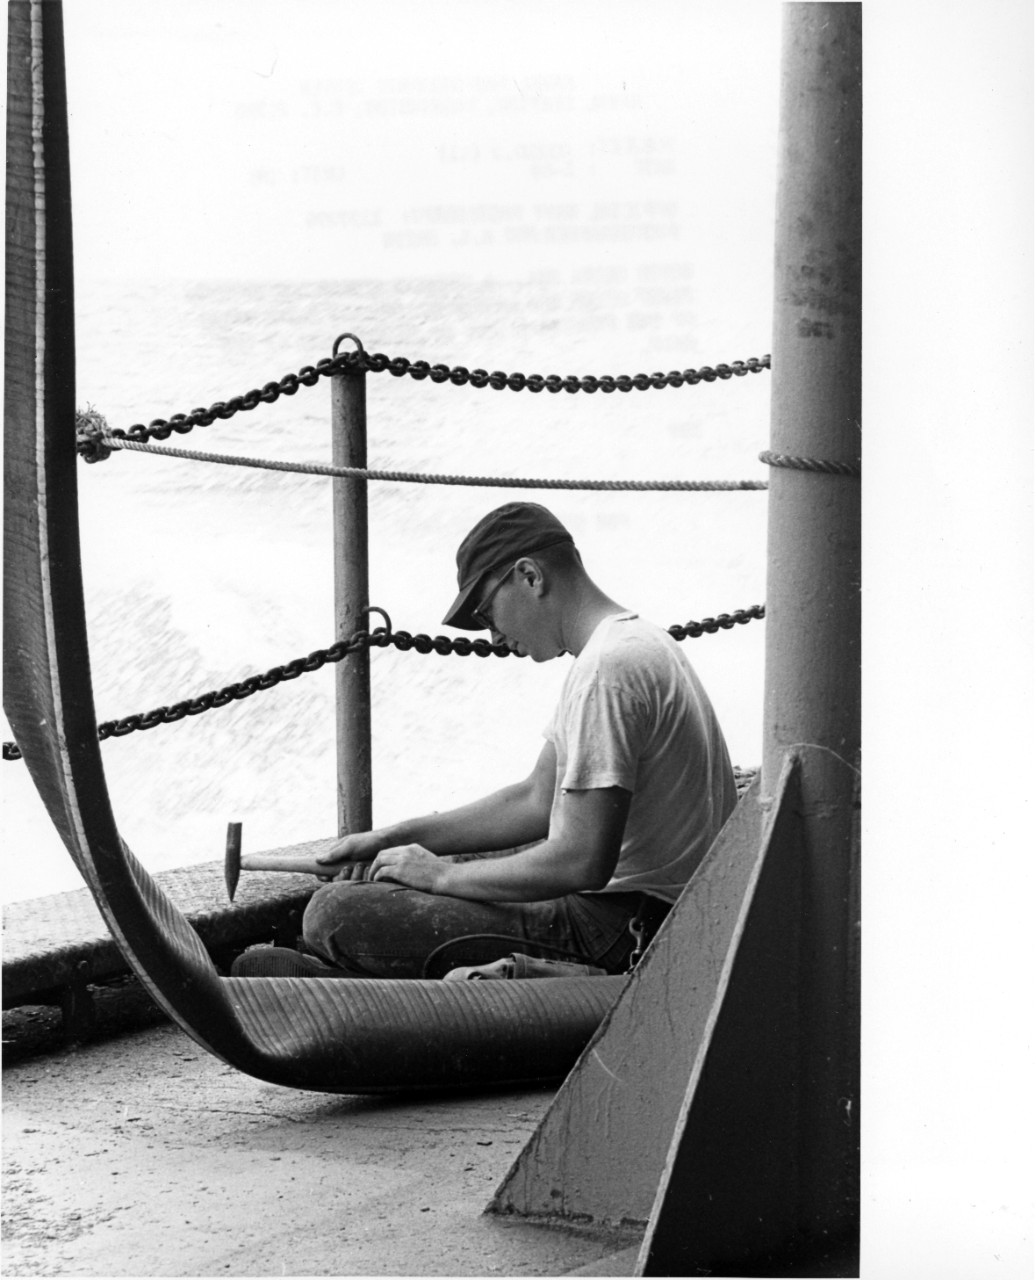 <p>South China Sea - a crewman aboard the seventh feet oiler USS Mattaponi (AO-41) chips paint, a perpetual task of maintenance of the ship. January, 1969.</p>